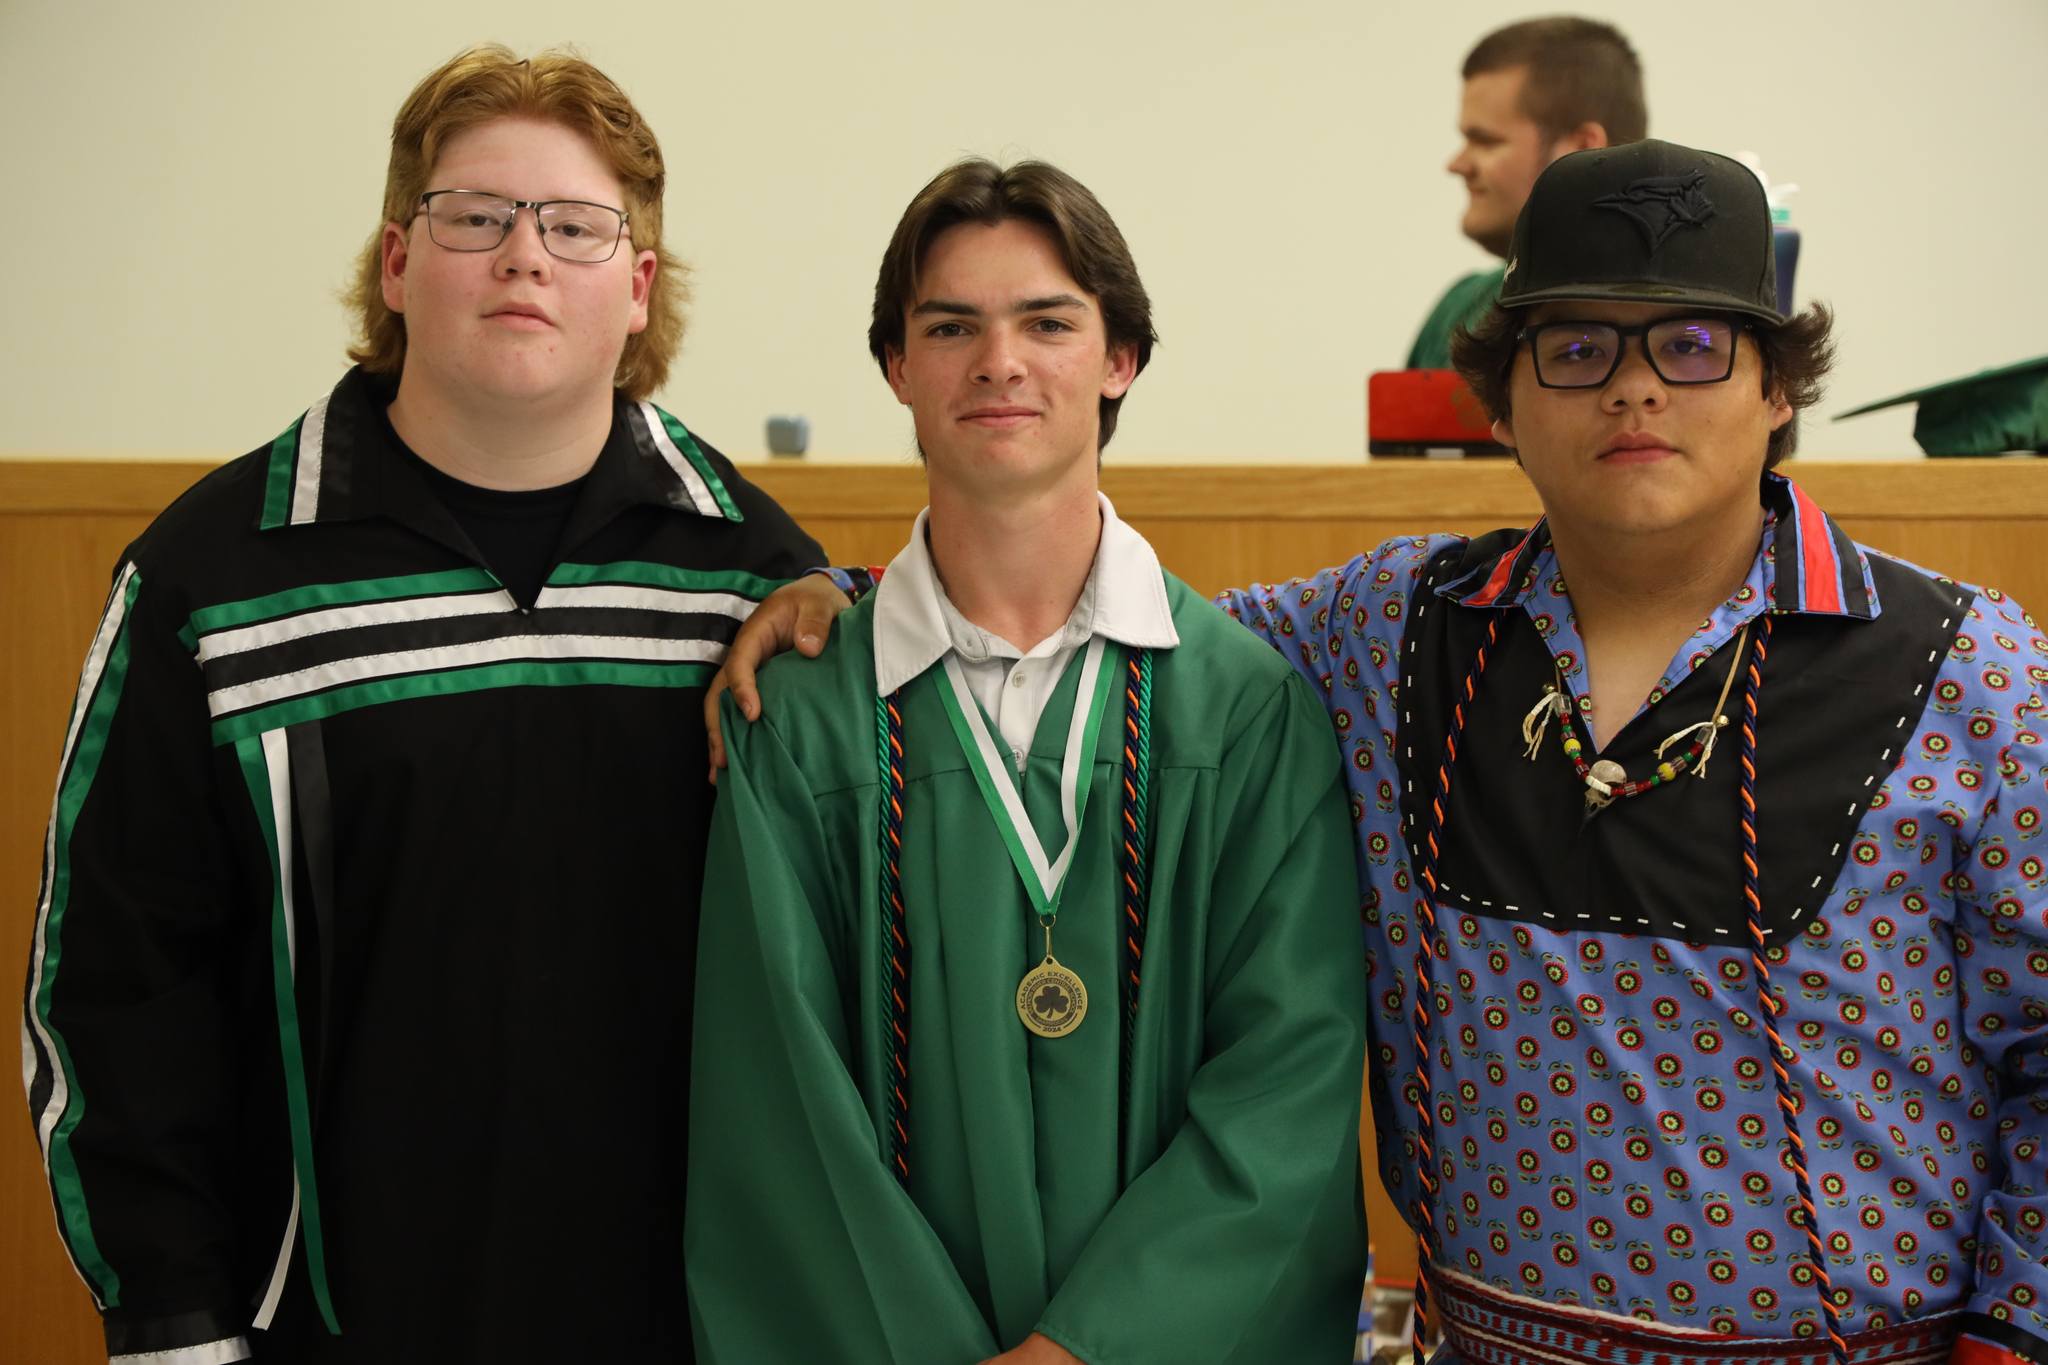 Three students, two in native dress stand together before the graduation ceremony